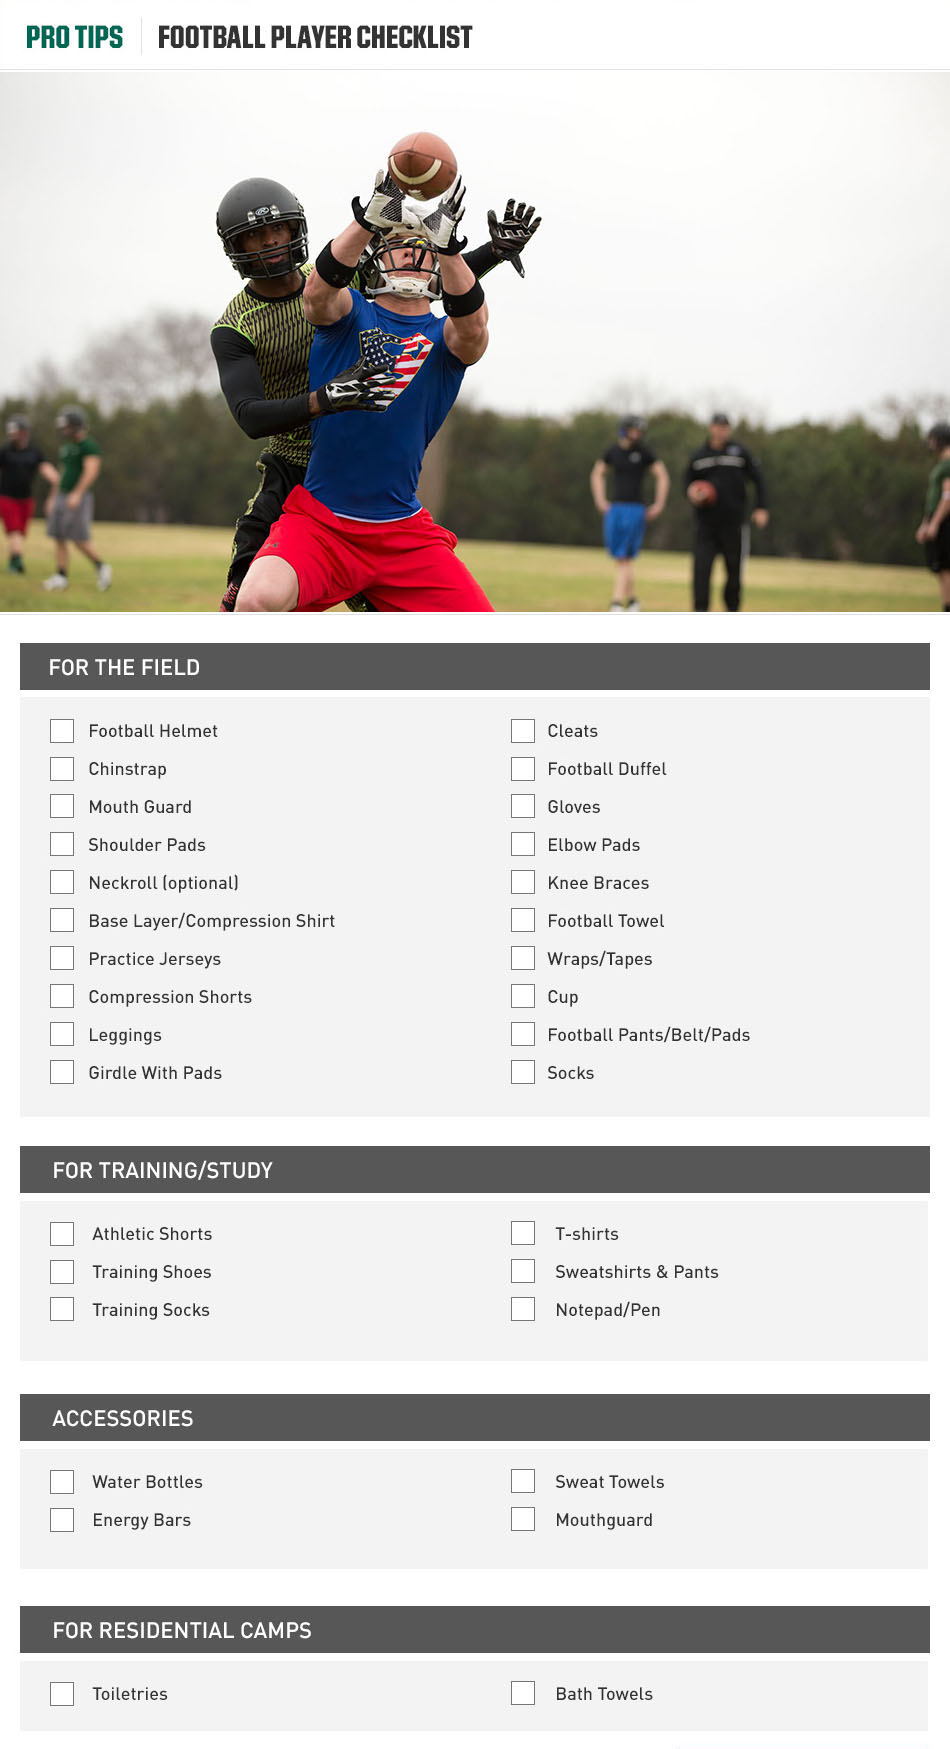 The Ultimate Football Equipment Checklist for Grassroots Training